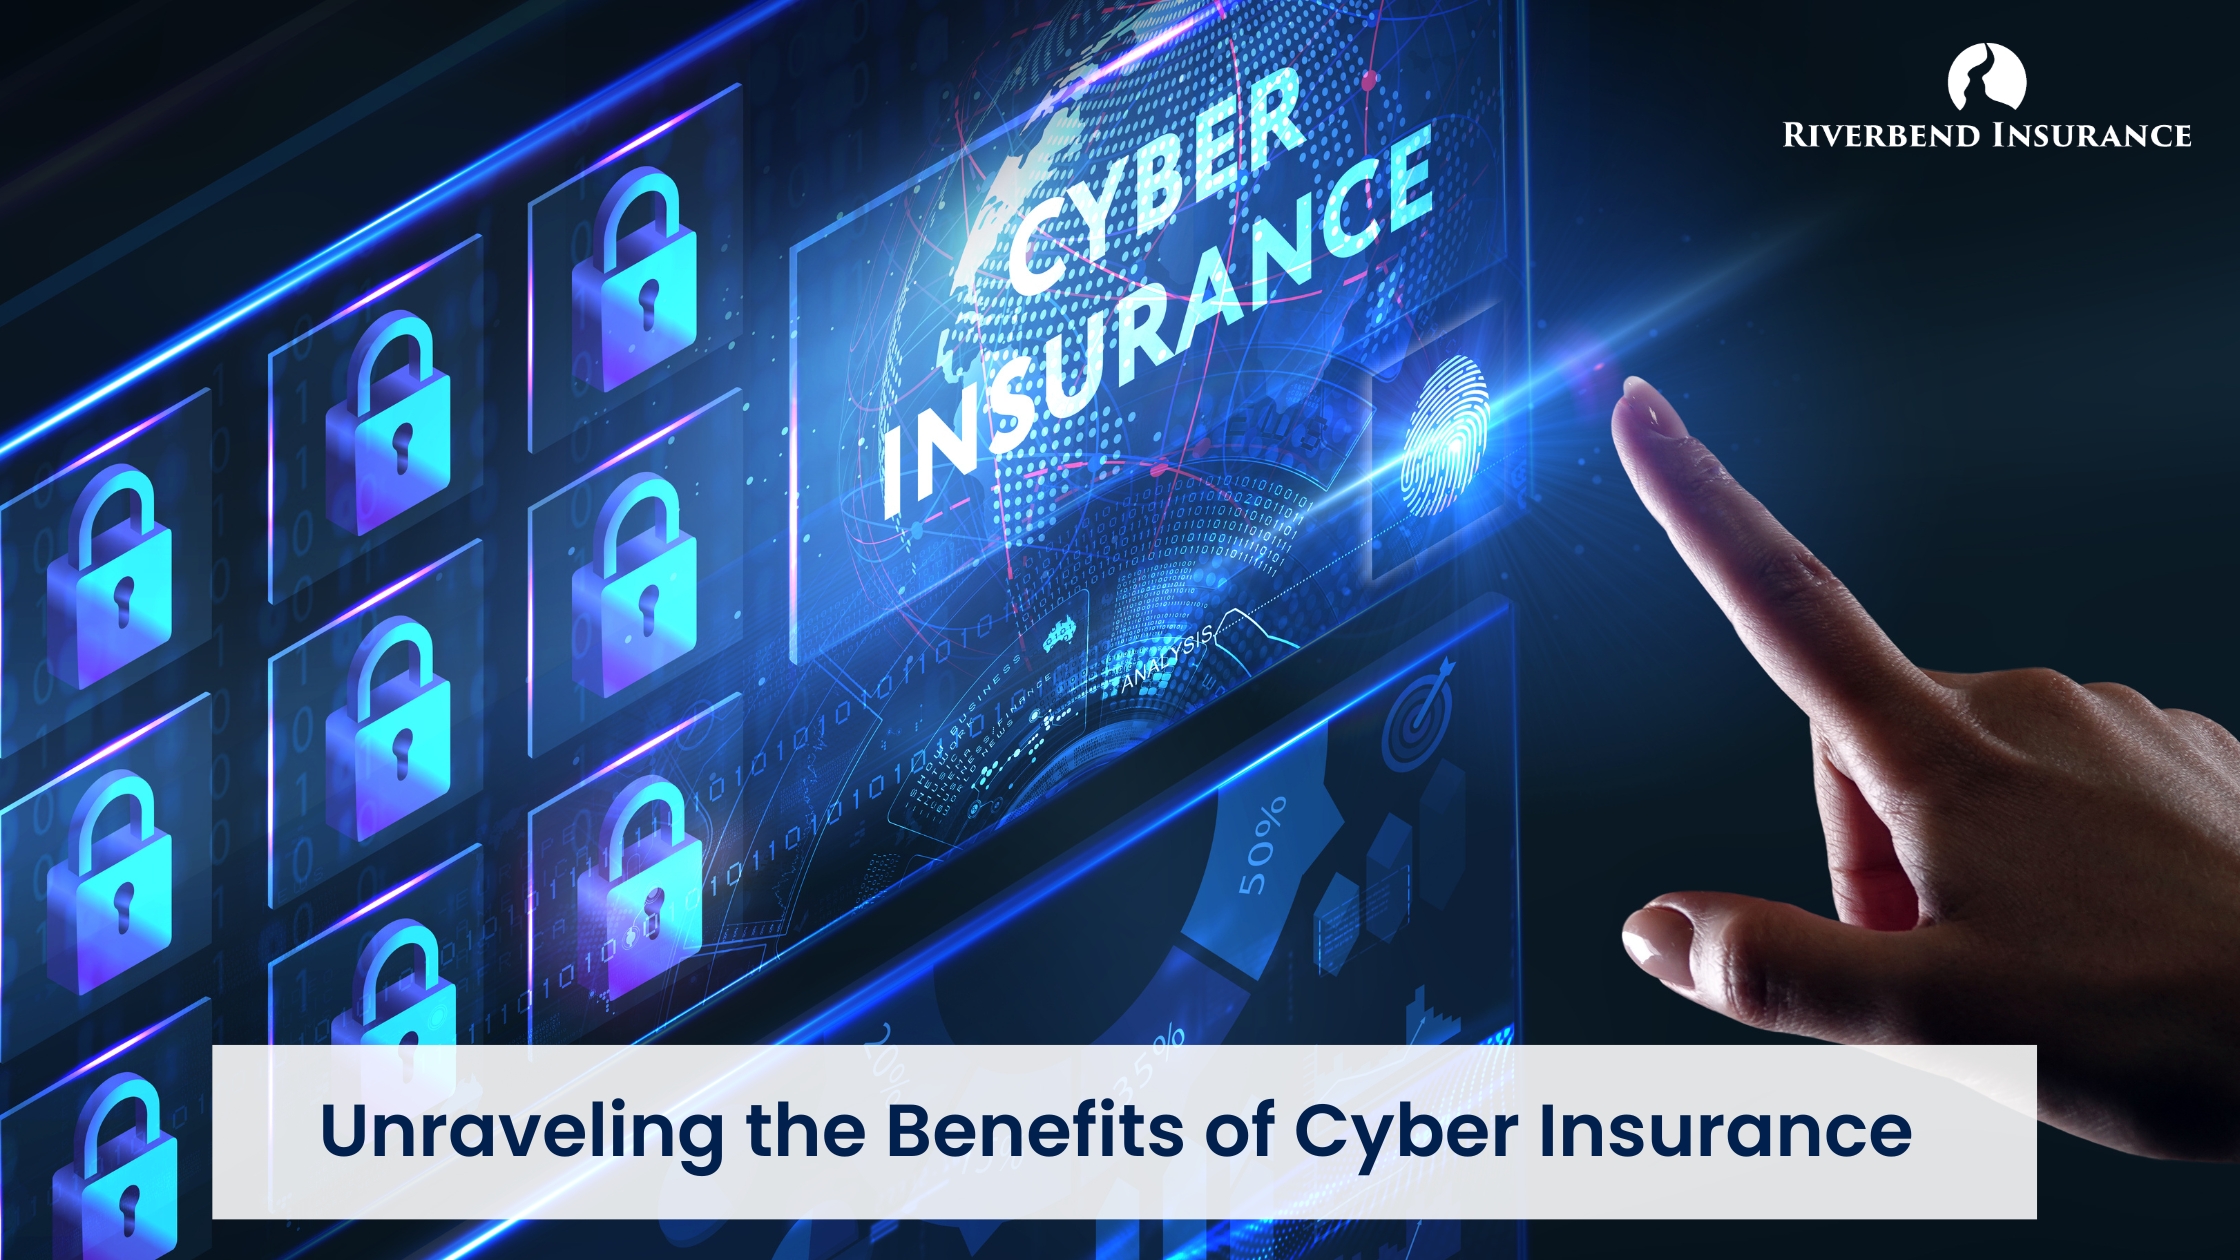 Unraveling the Benefits of Cyber Insurance